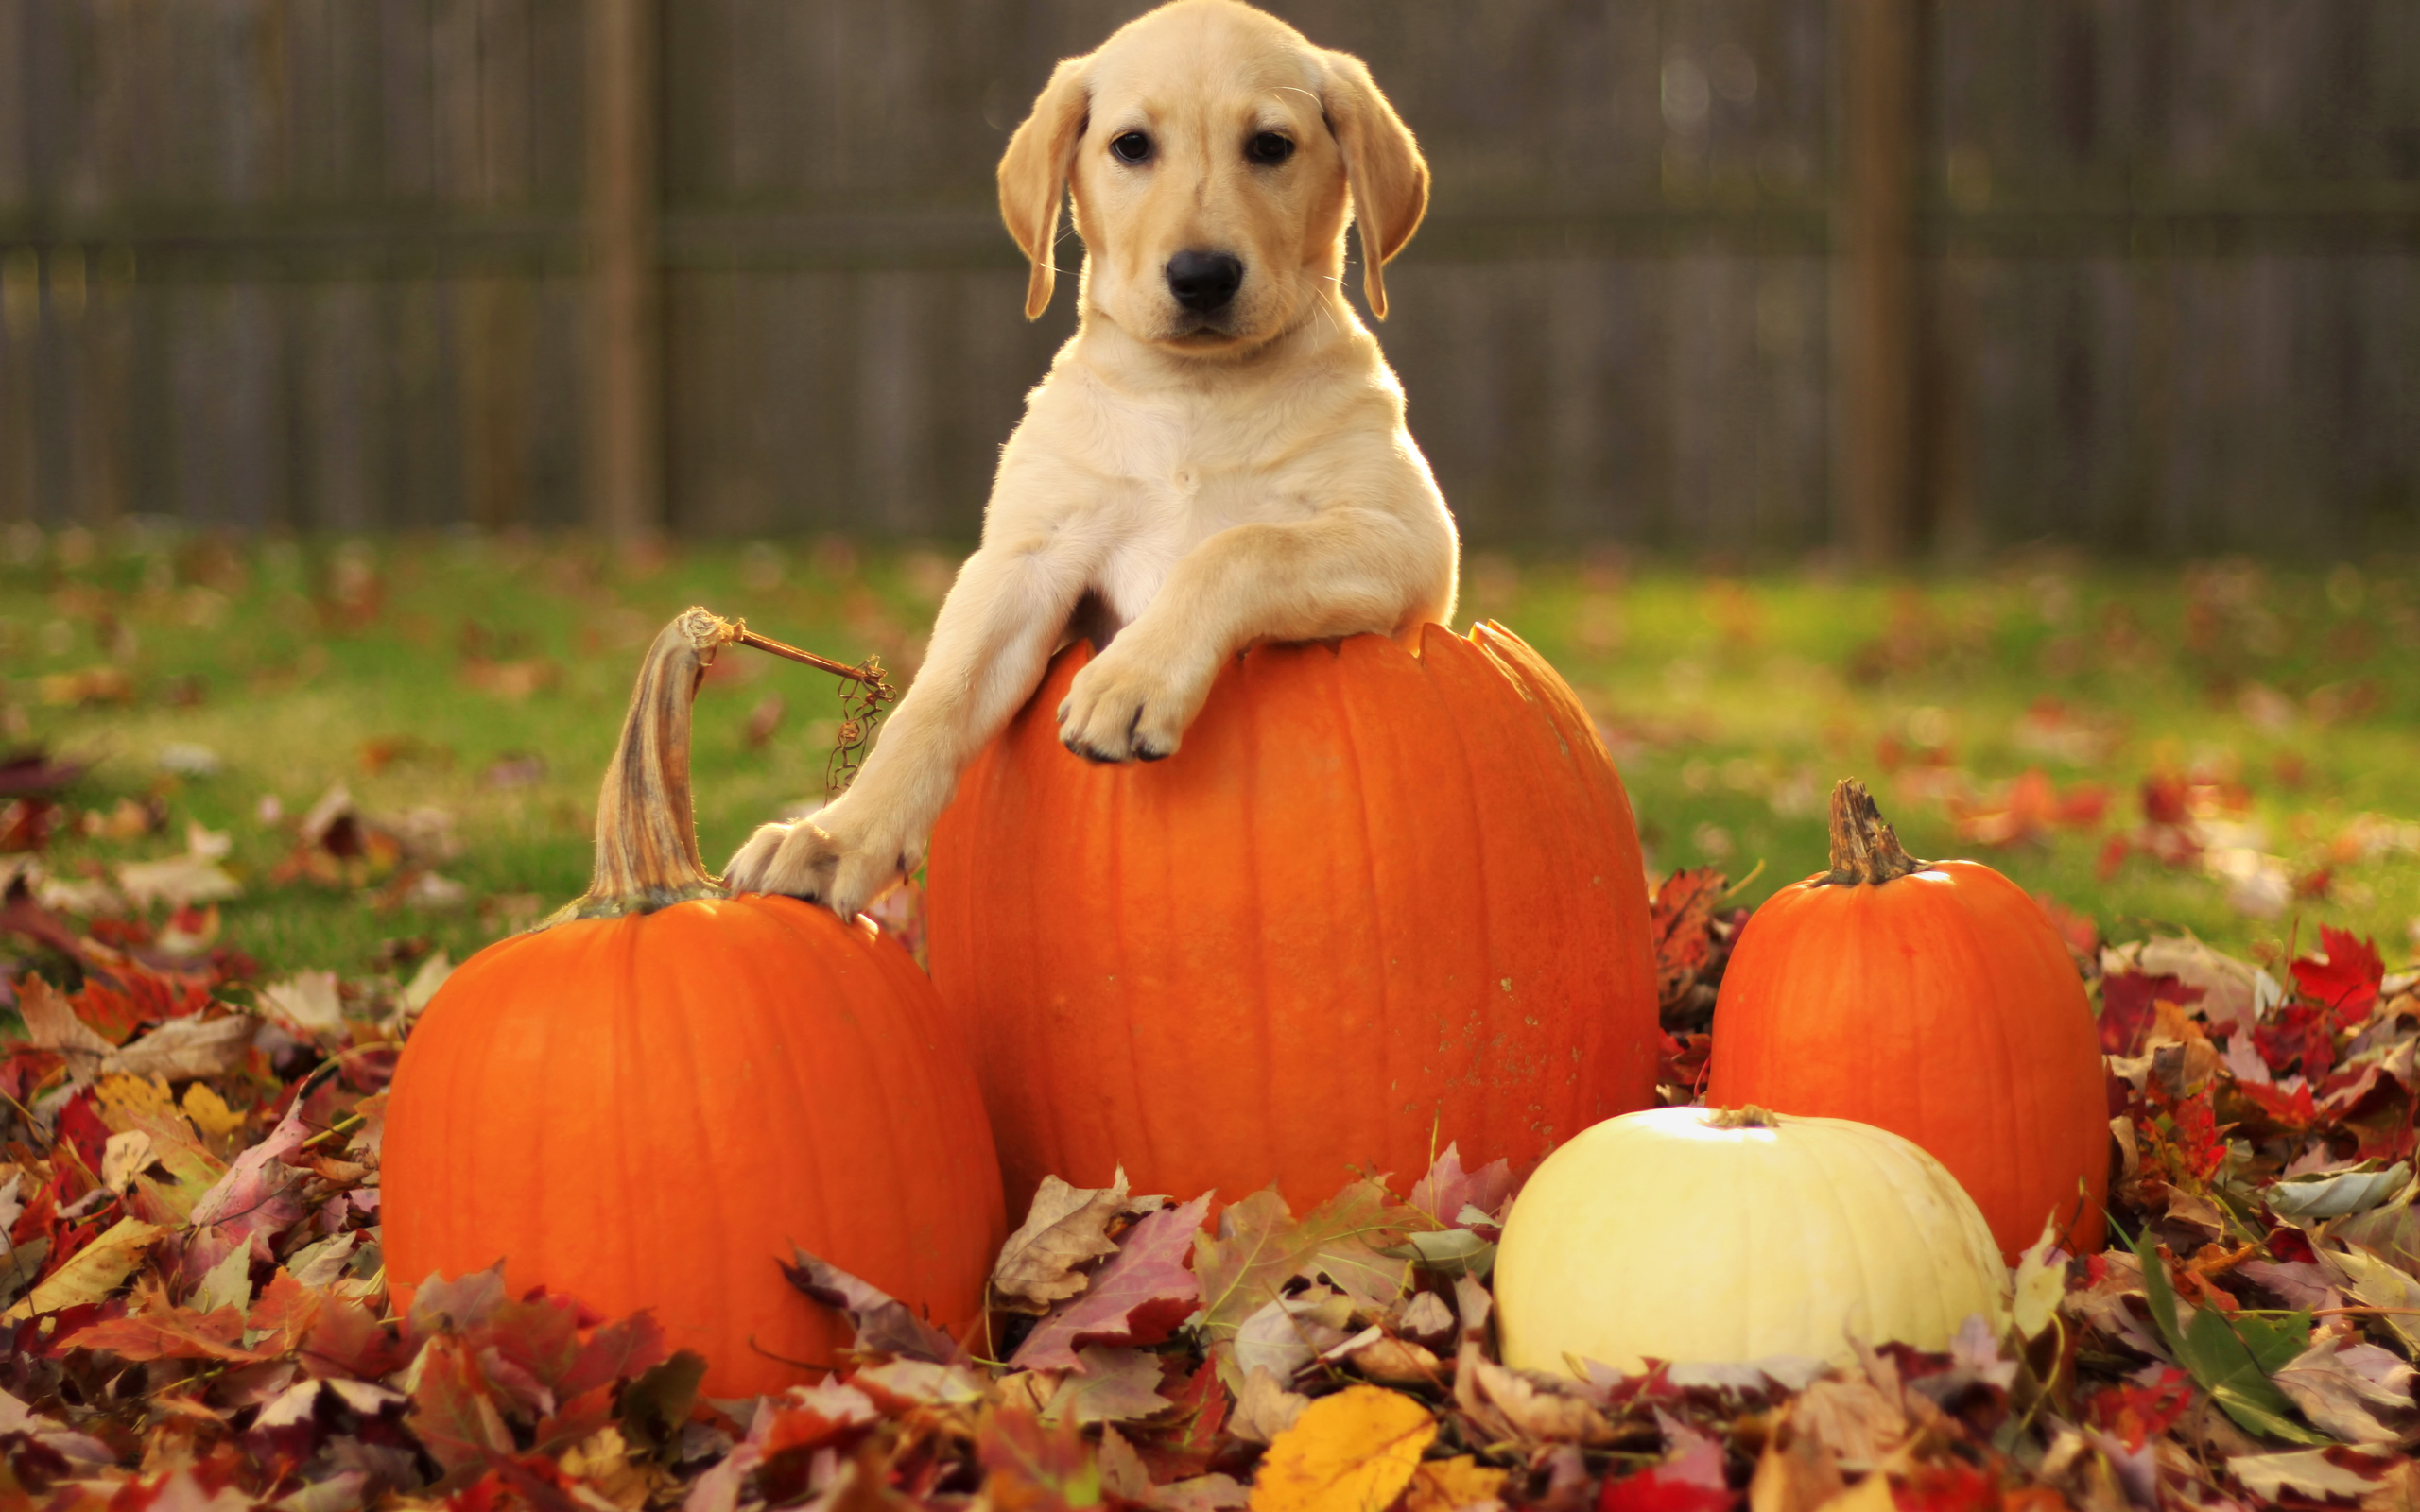 2560x1600 fall-pumpkin-wallpaper-27122-hd-wallpapers Professional Pet Care Services in Archer, Gainesville, Fl